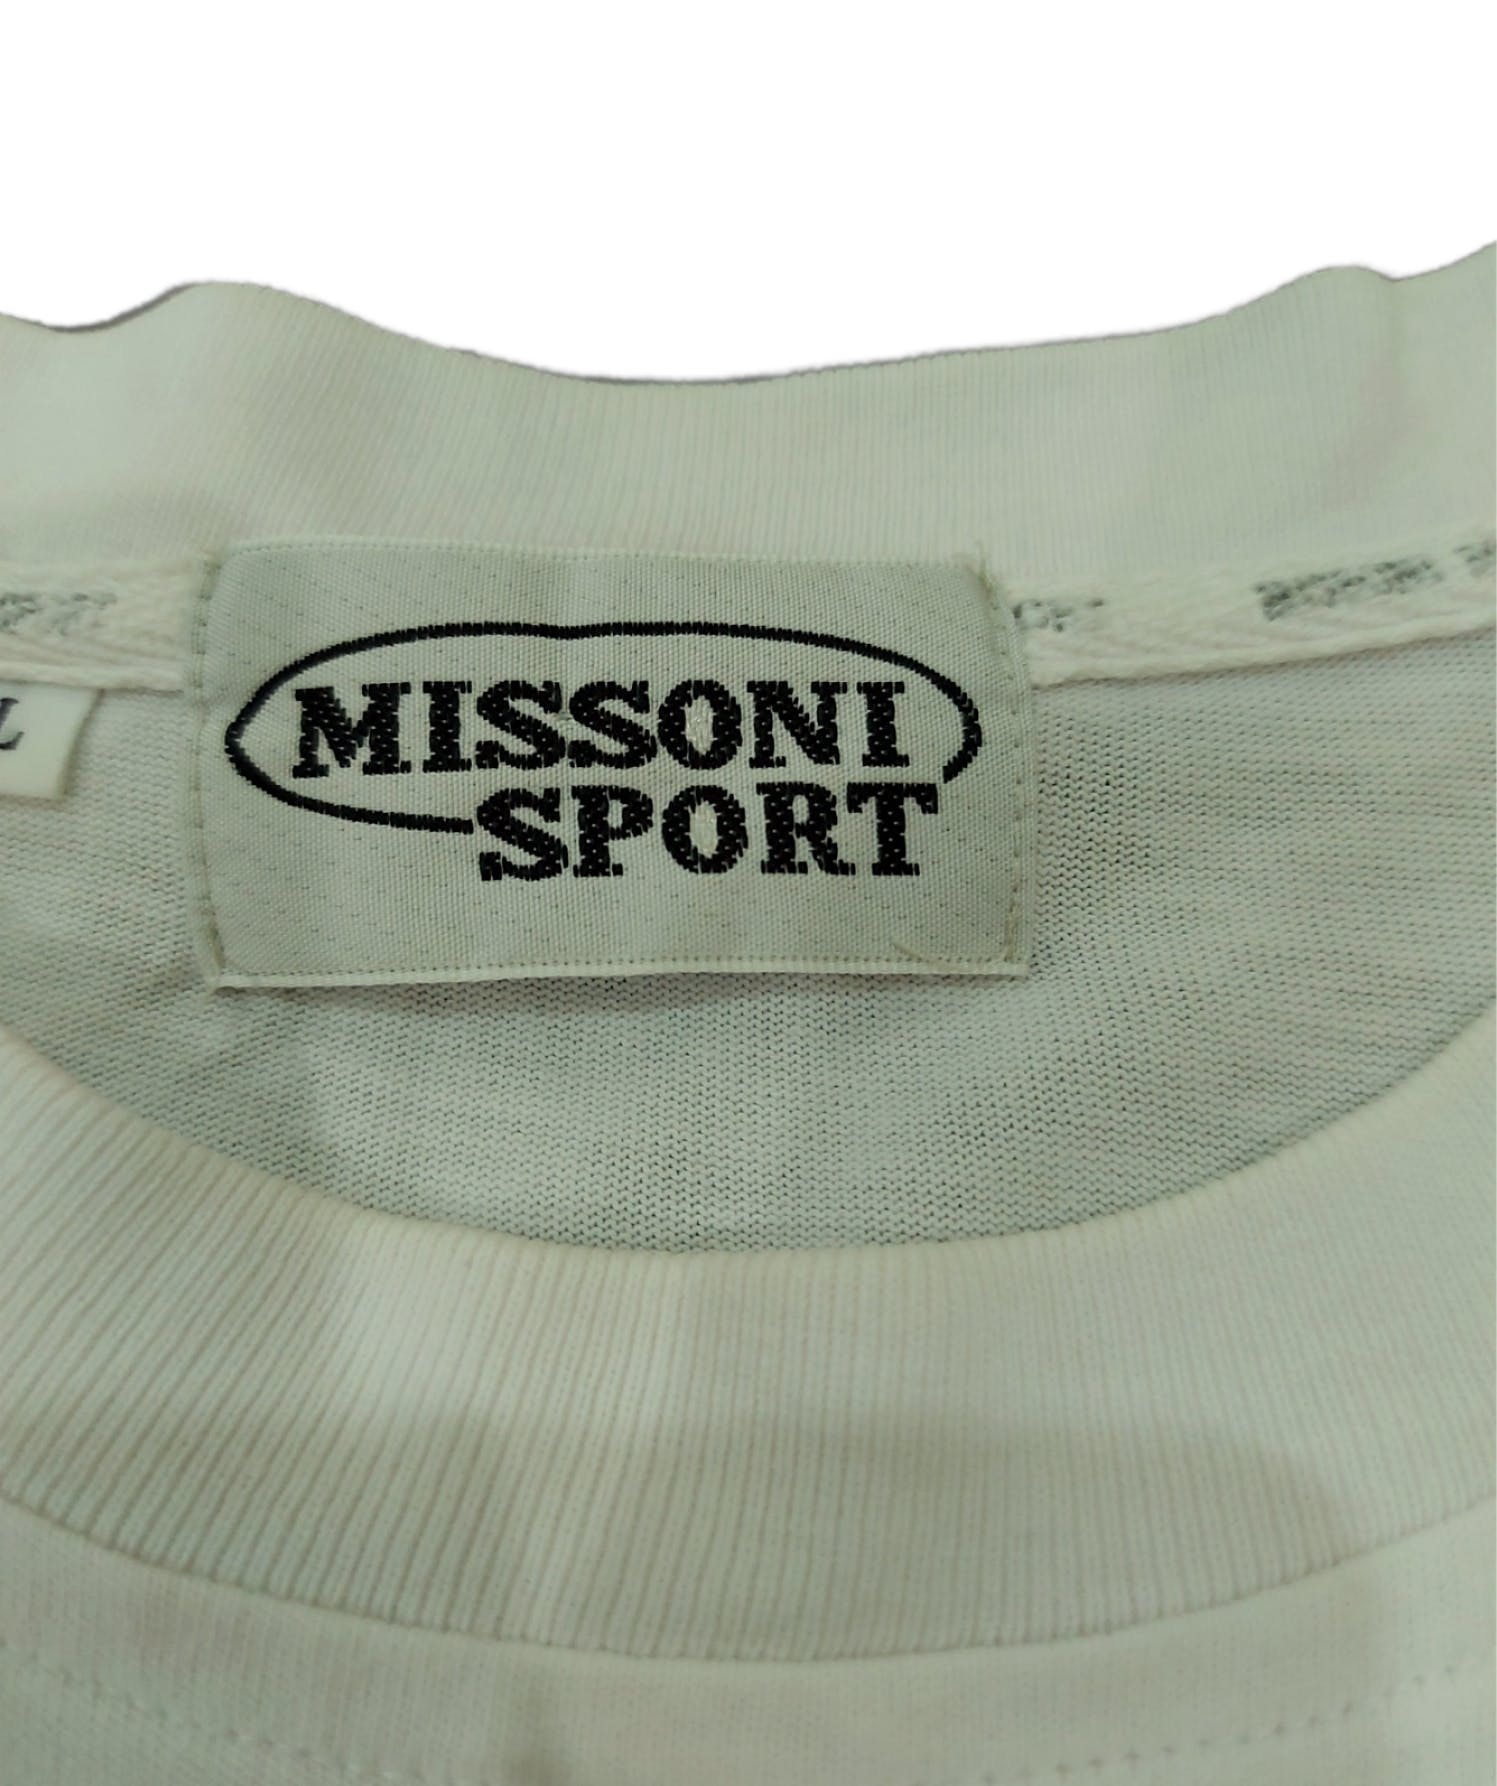 RARE! VTG MISSONI SPORT ITALY PATCH SPELL OUT - 6